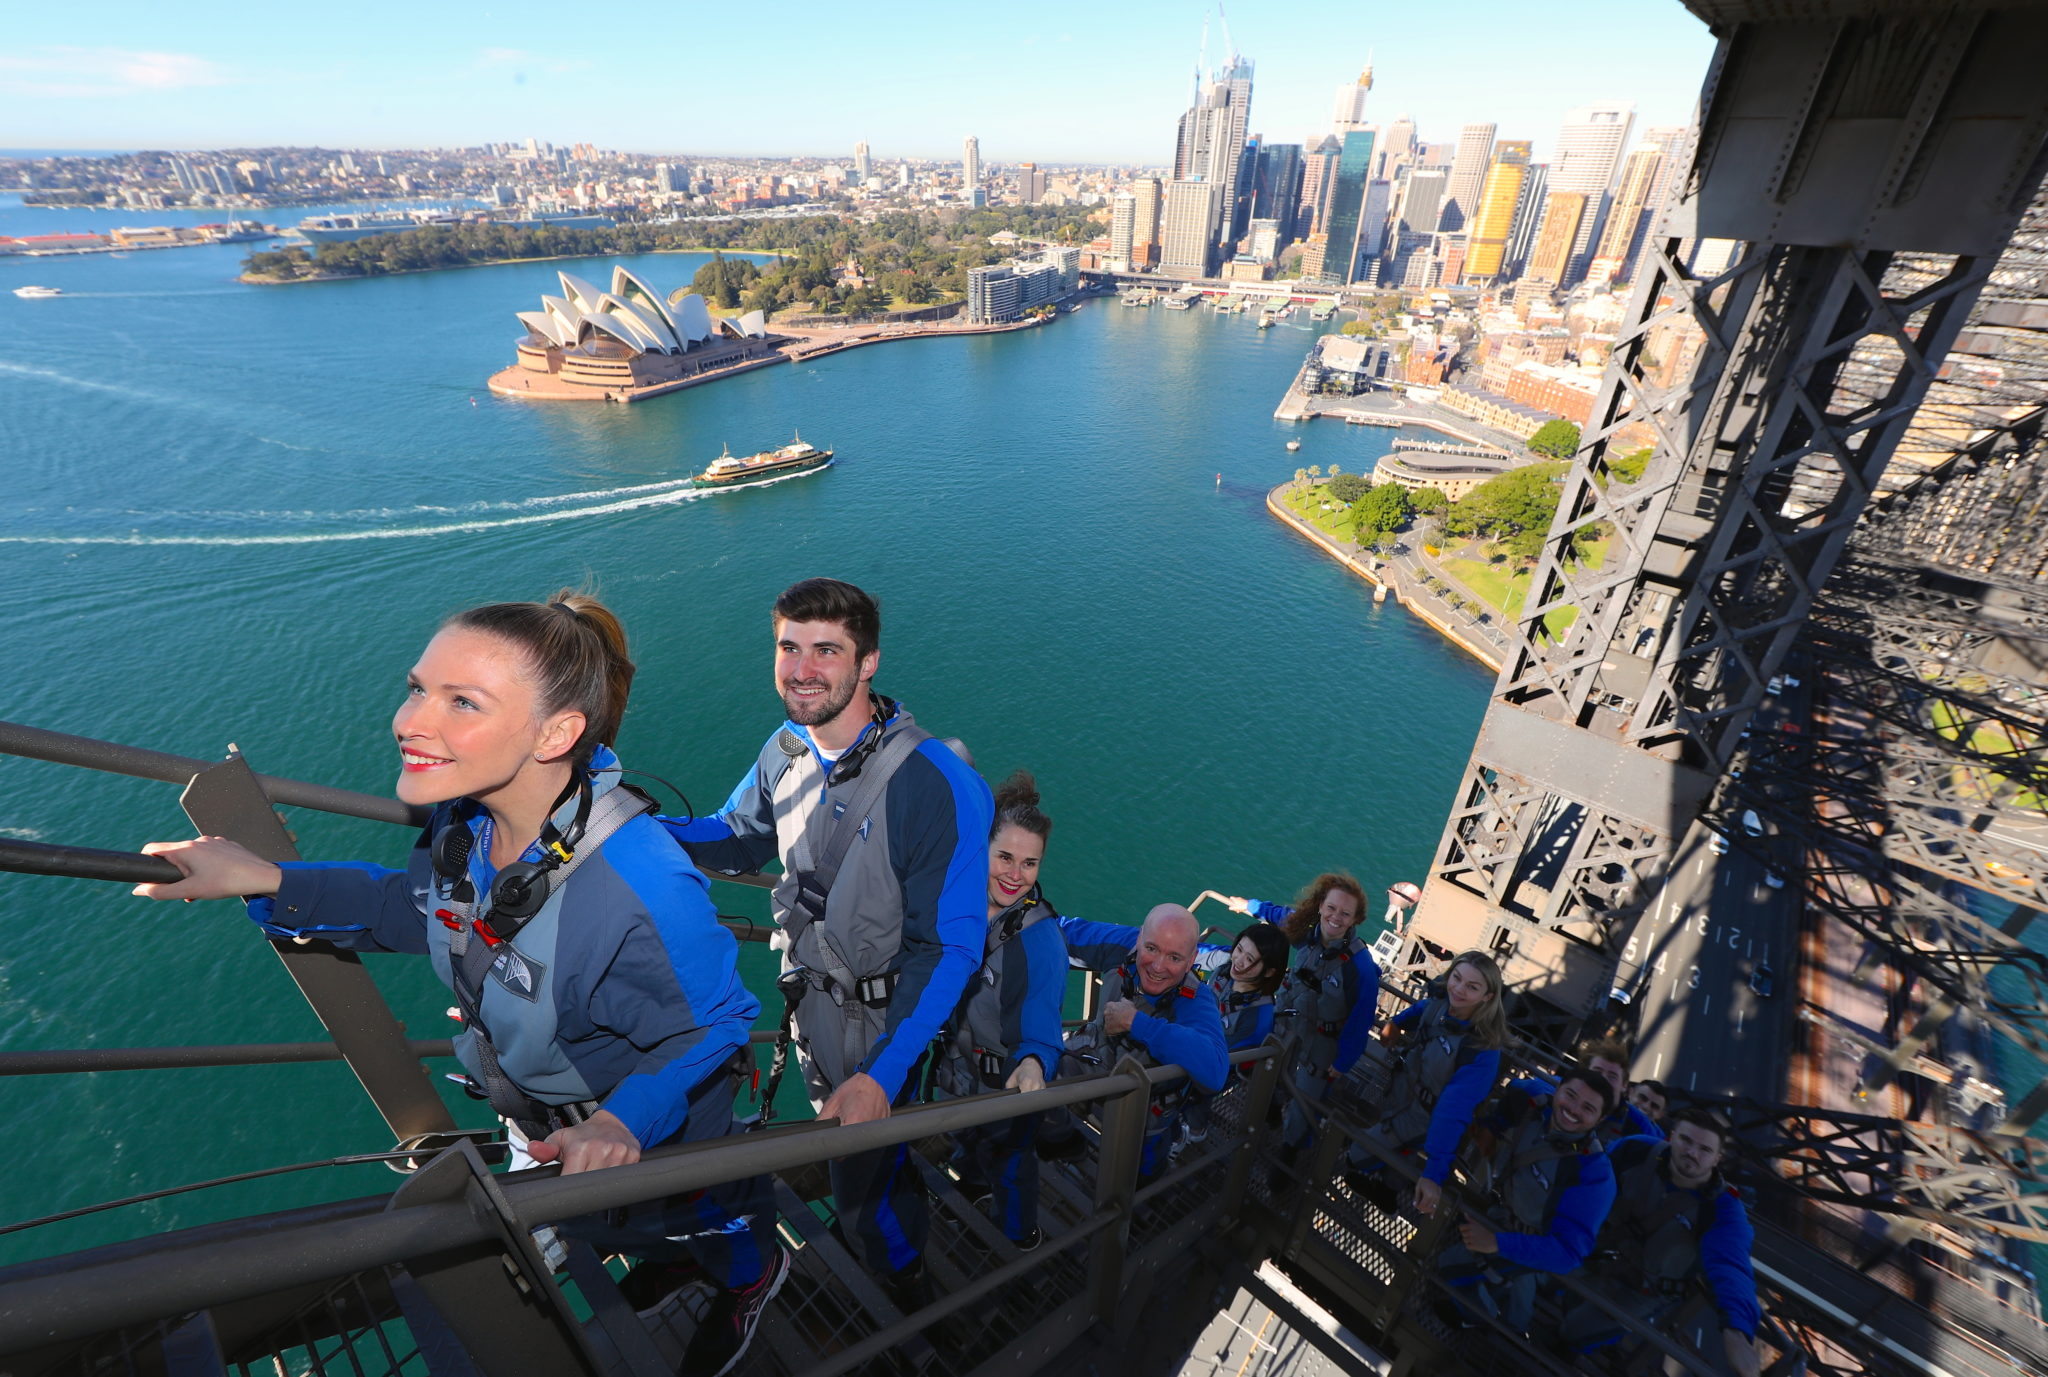 escorted trips to australia and new zealand